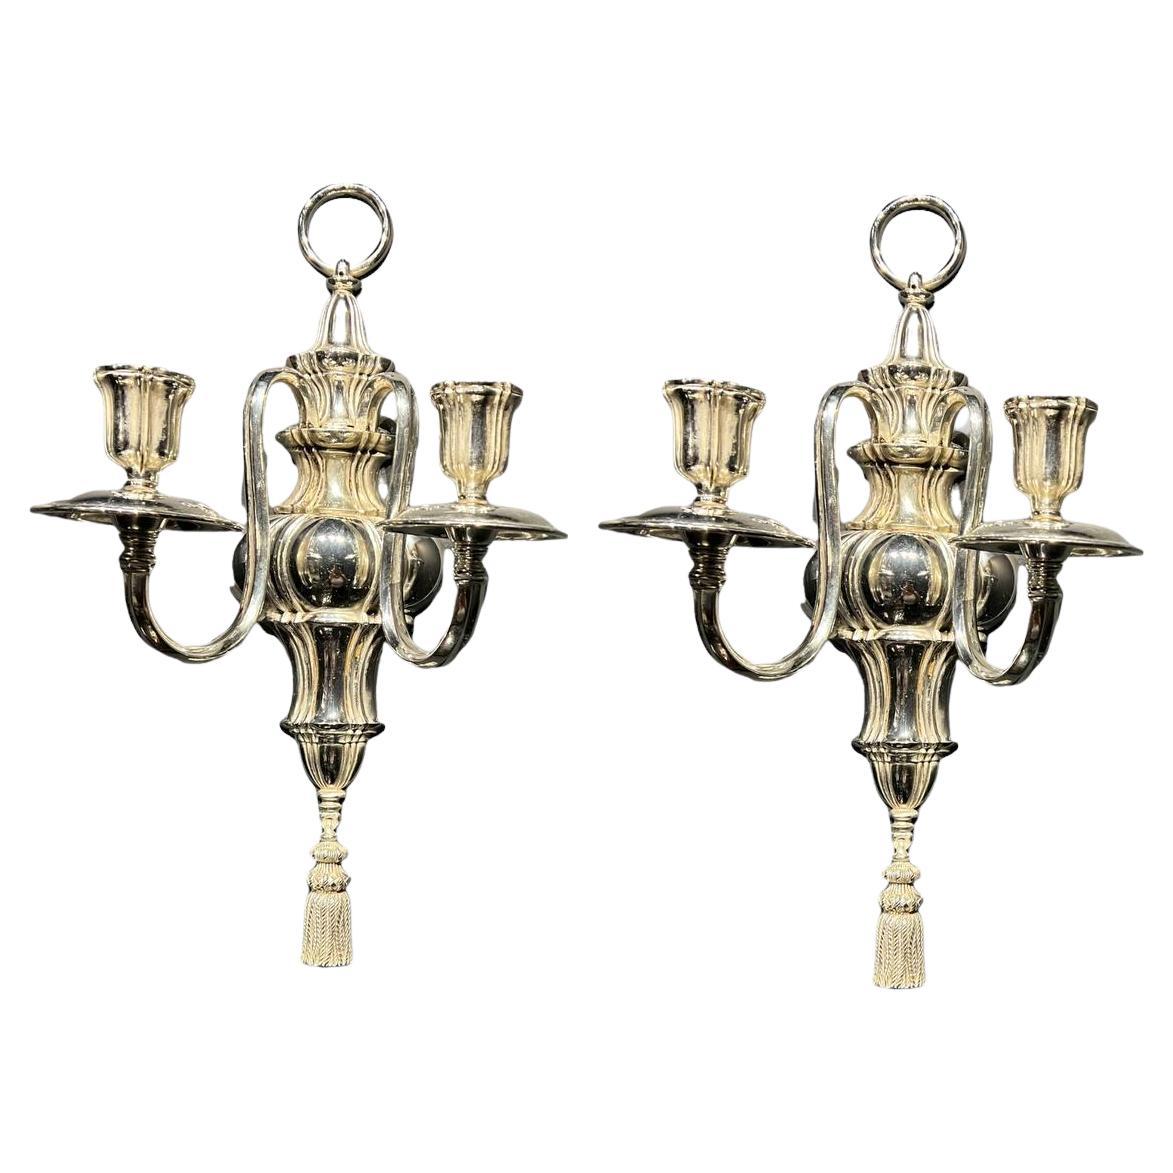 1920’s Caldwell silver plated Sconces